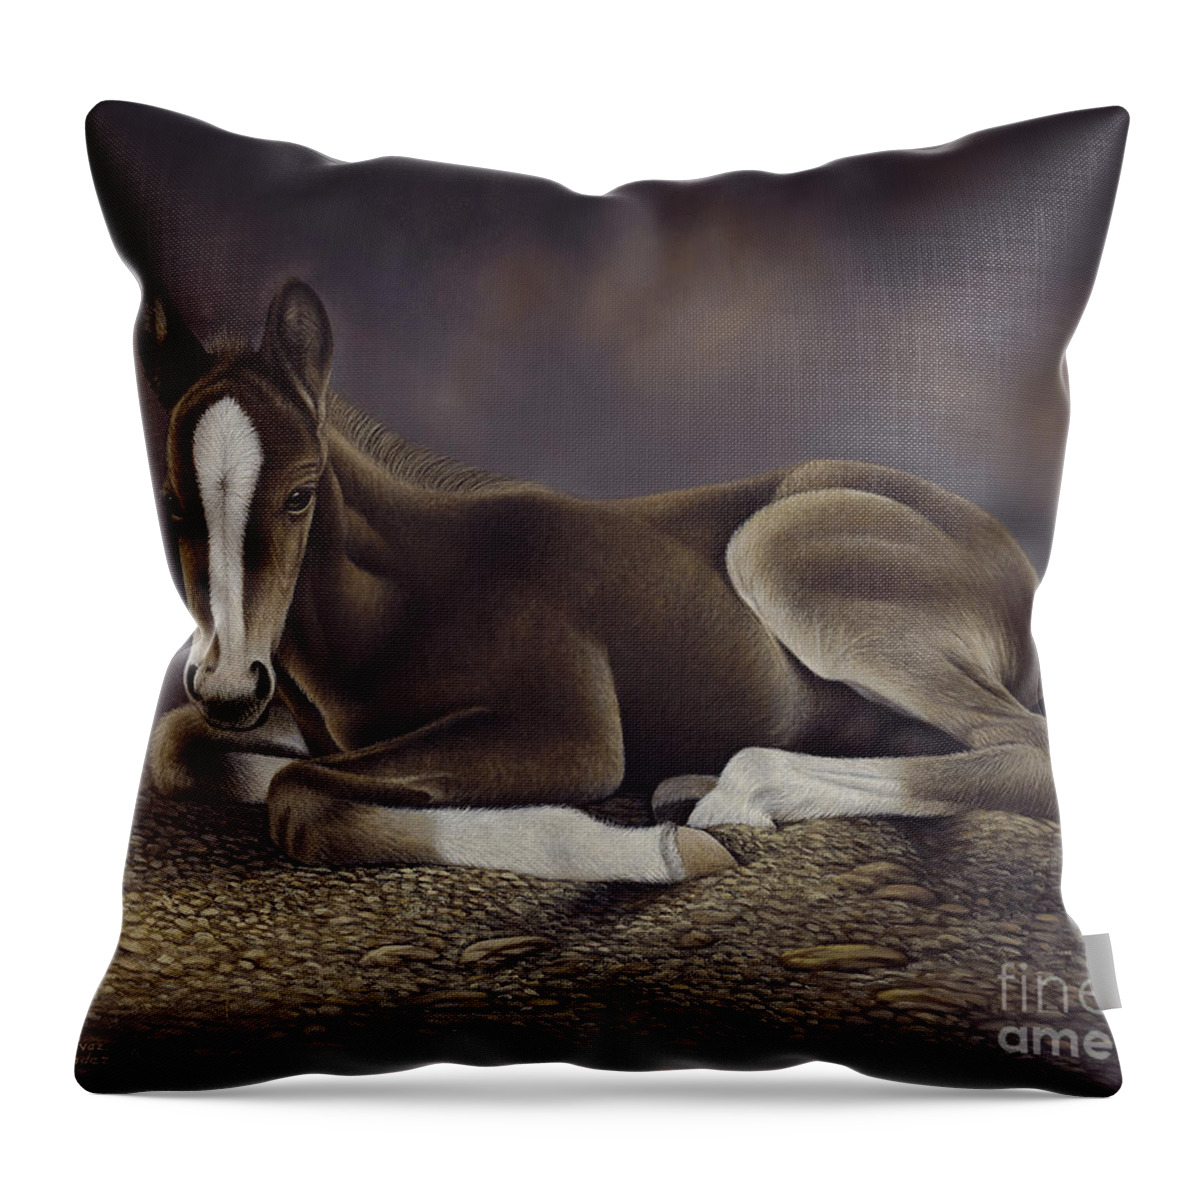 Horses Throw Pillow featuring the painting Lucky by Ricardo Chavez-Mendez